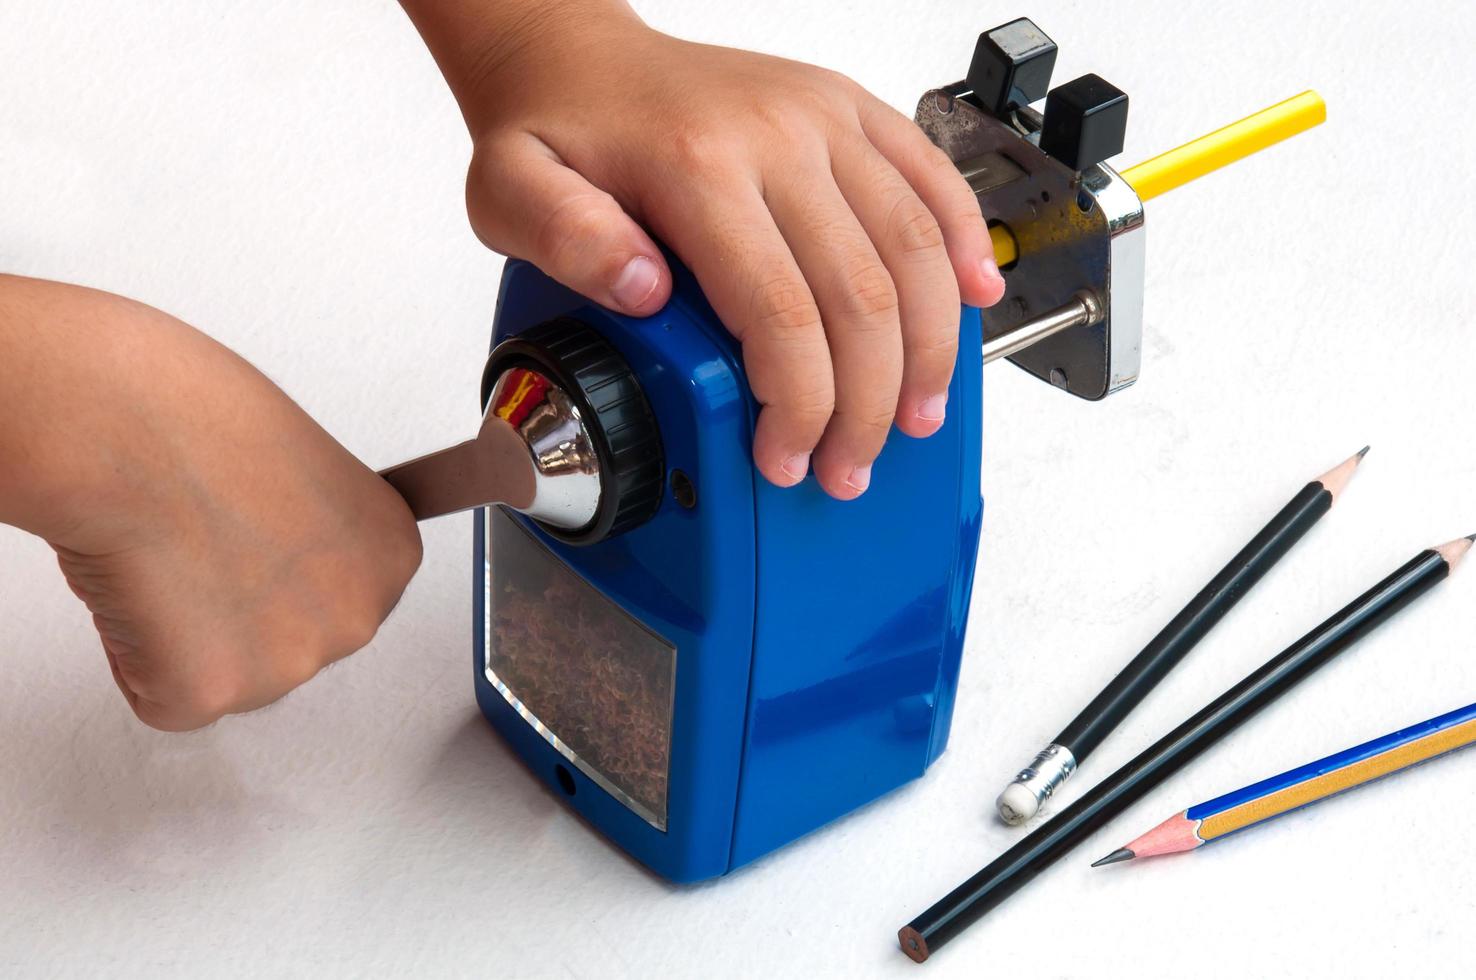 A boy is sharpening his pencil using mechanical sharpener over white background photo